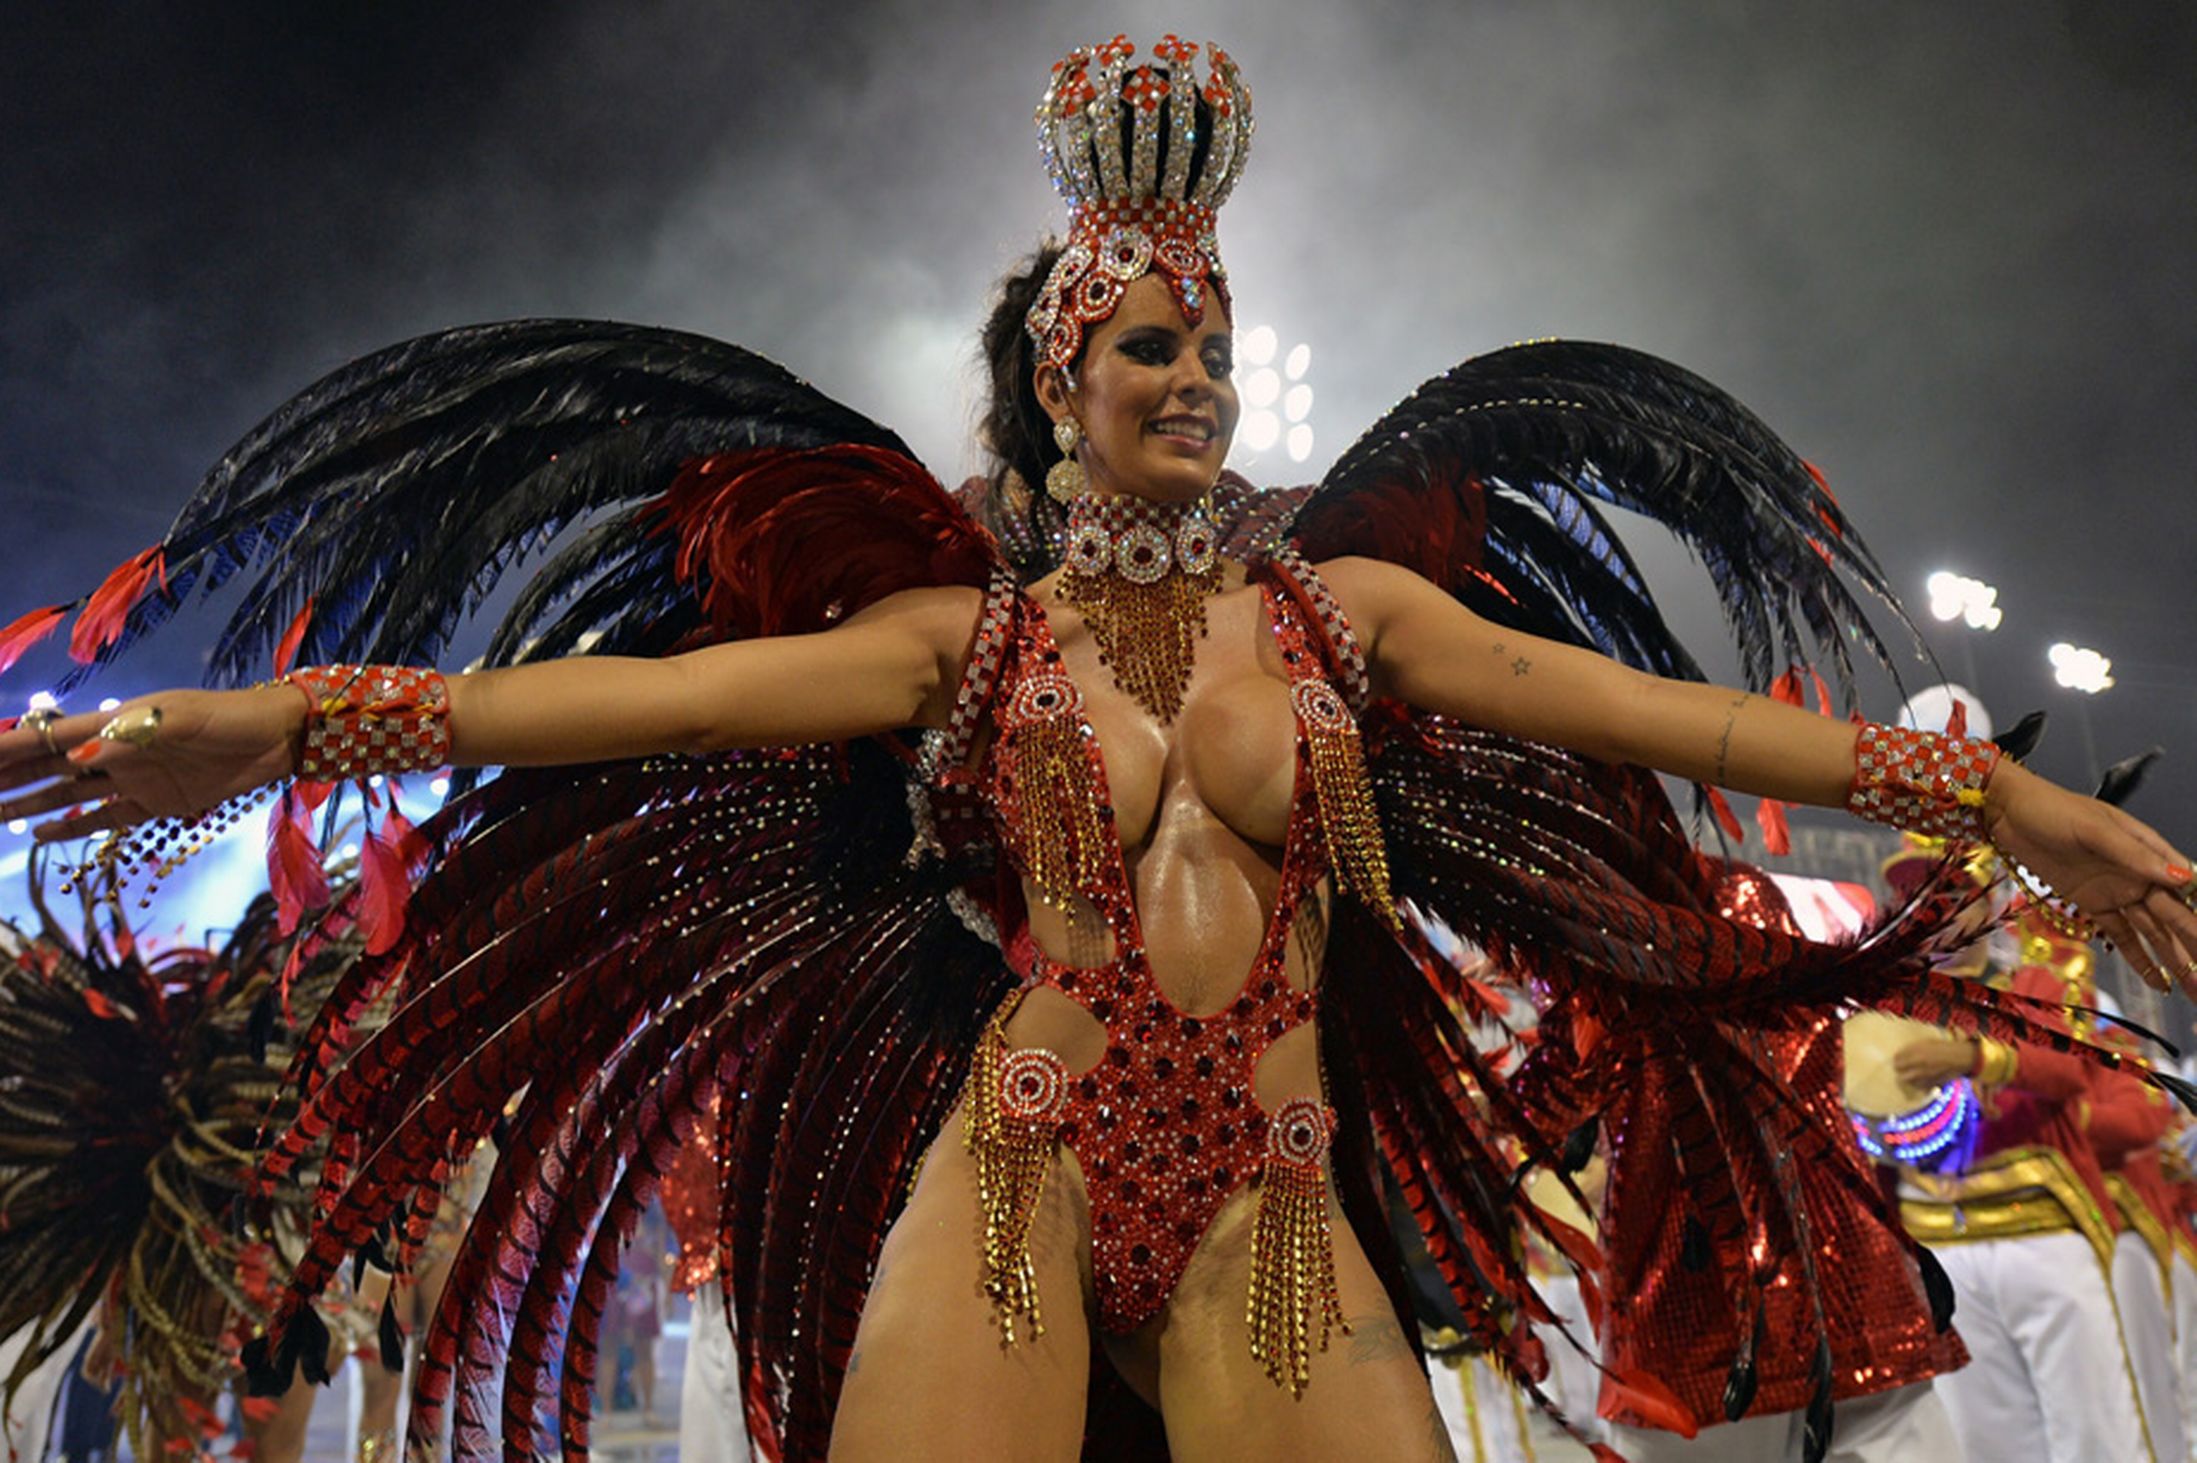 A reveler of the Perola Negra samba school performs during the second night of carnival parade at the Sambadrome in Sao Paulo, Brazil on March 1, 2014 (Photo Credit: Daily Mirror)